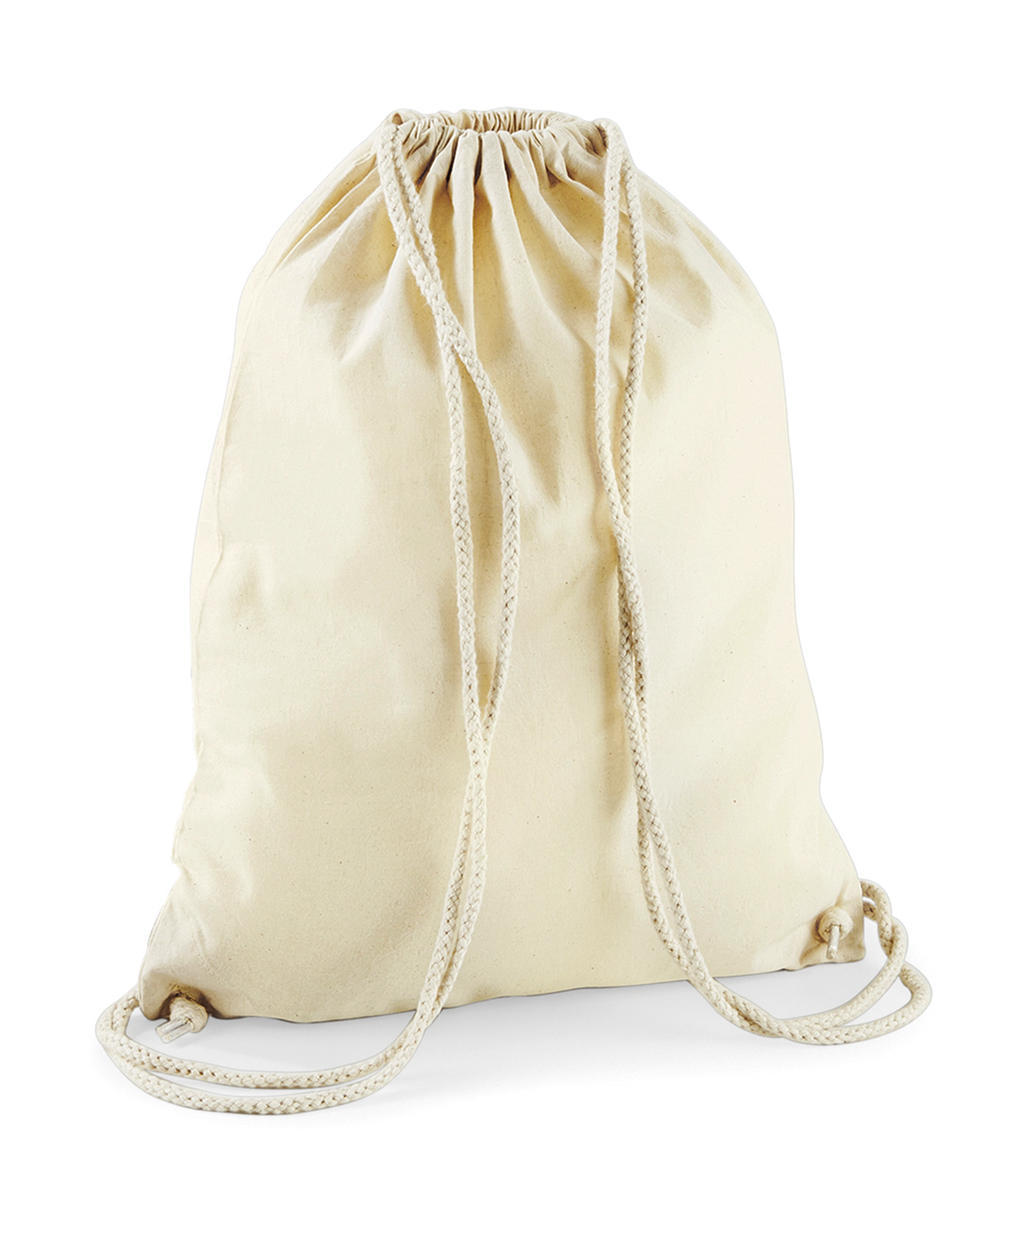  Cotton Gymsac in Farbe Natural